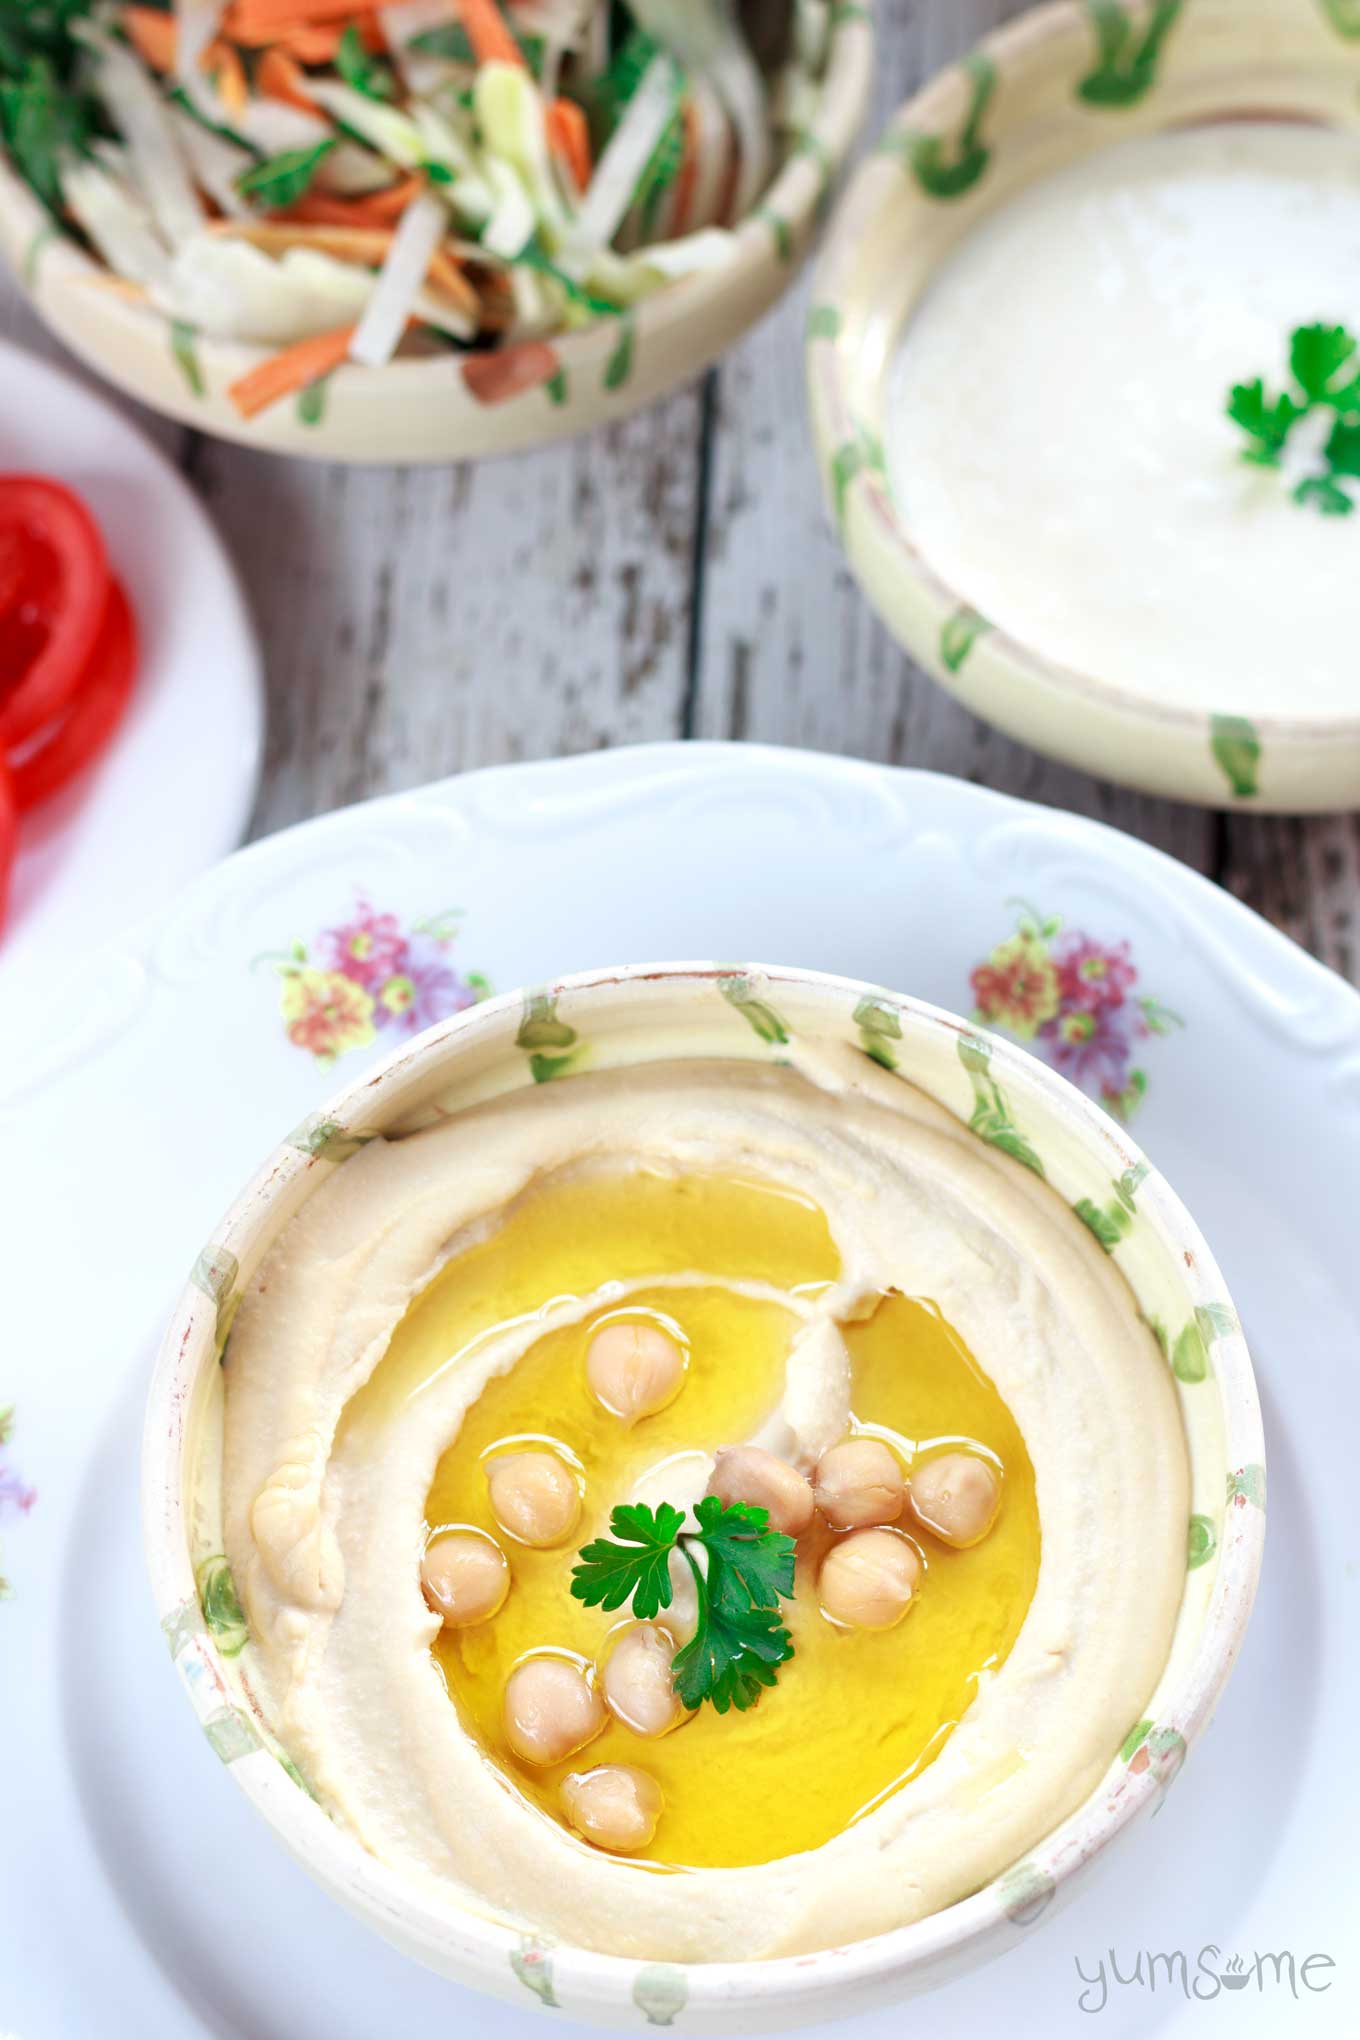 Chickpeas and olive oil in a bowl of perfectly smooth and creamy hummus.